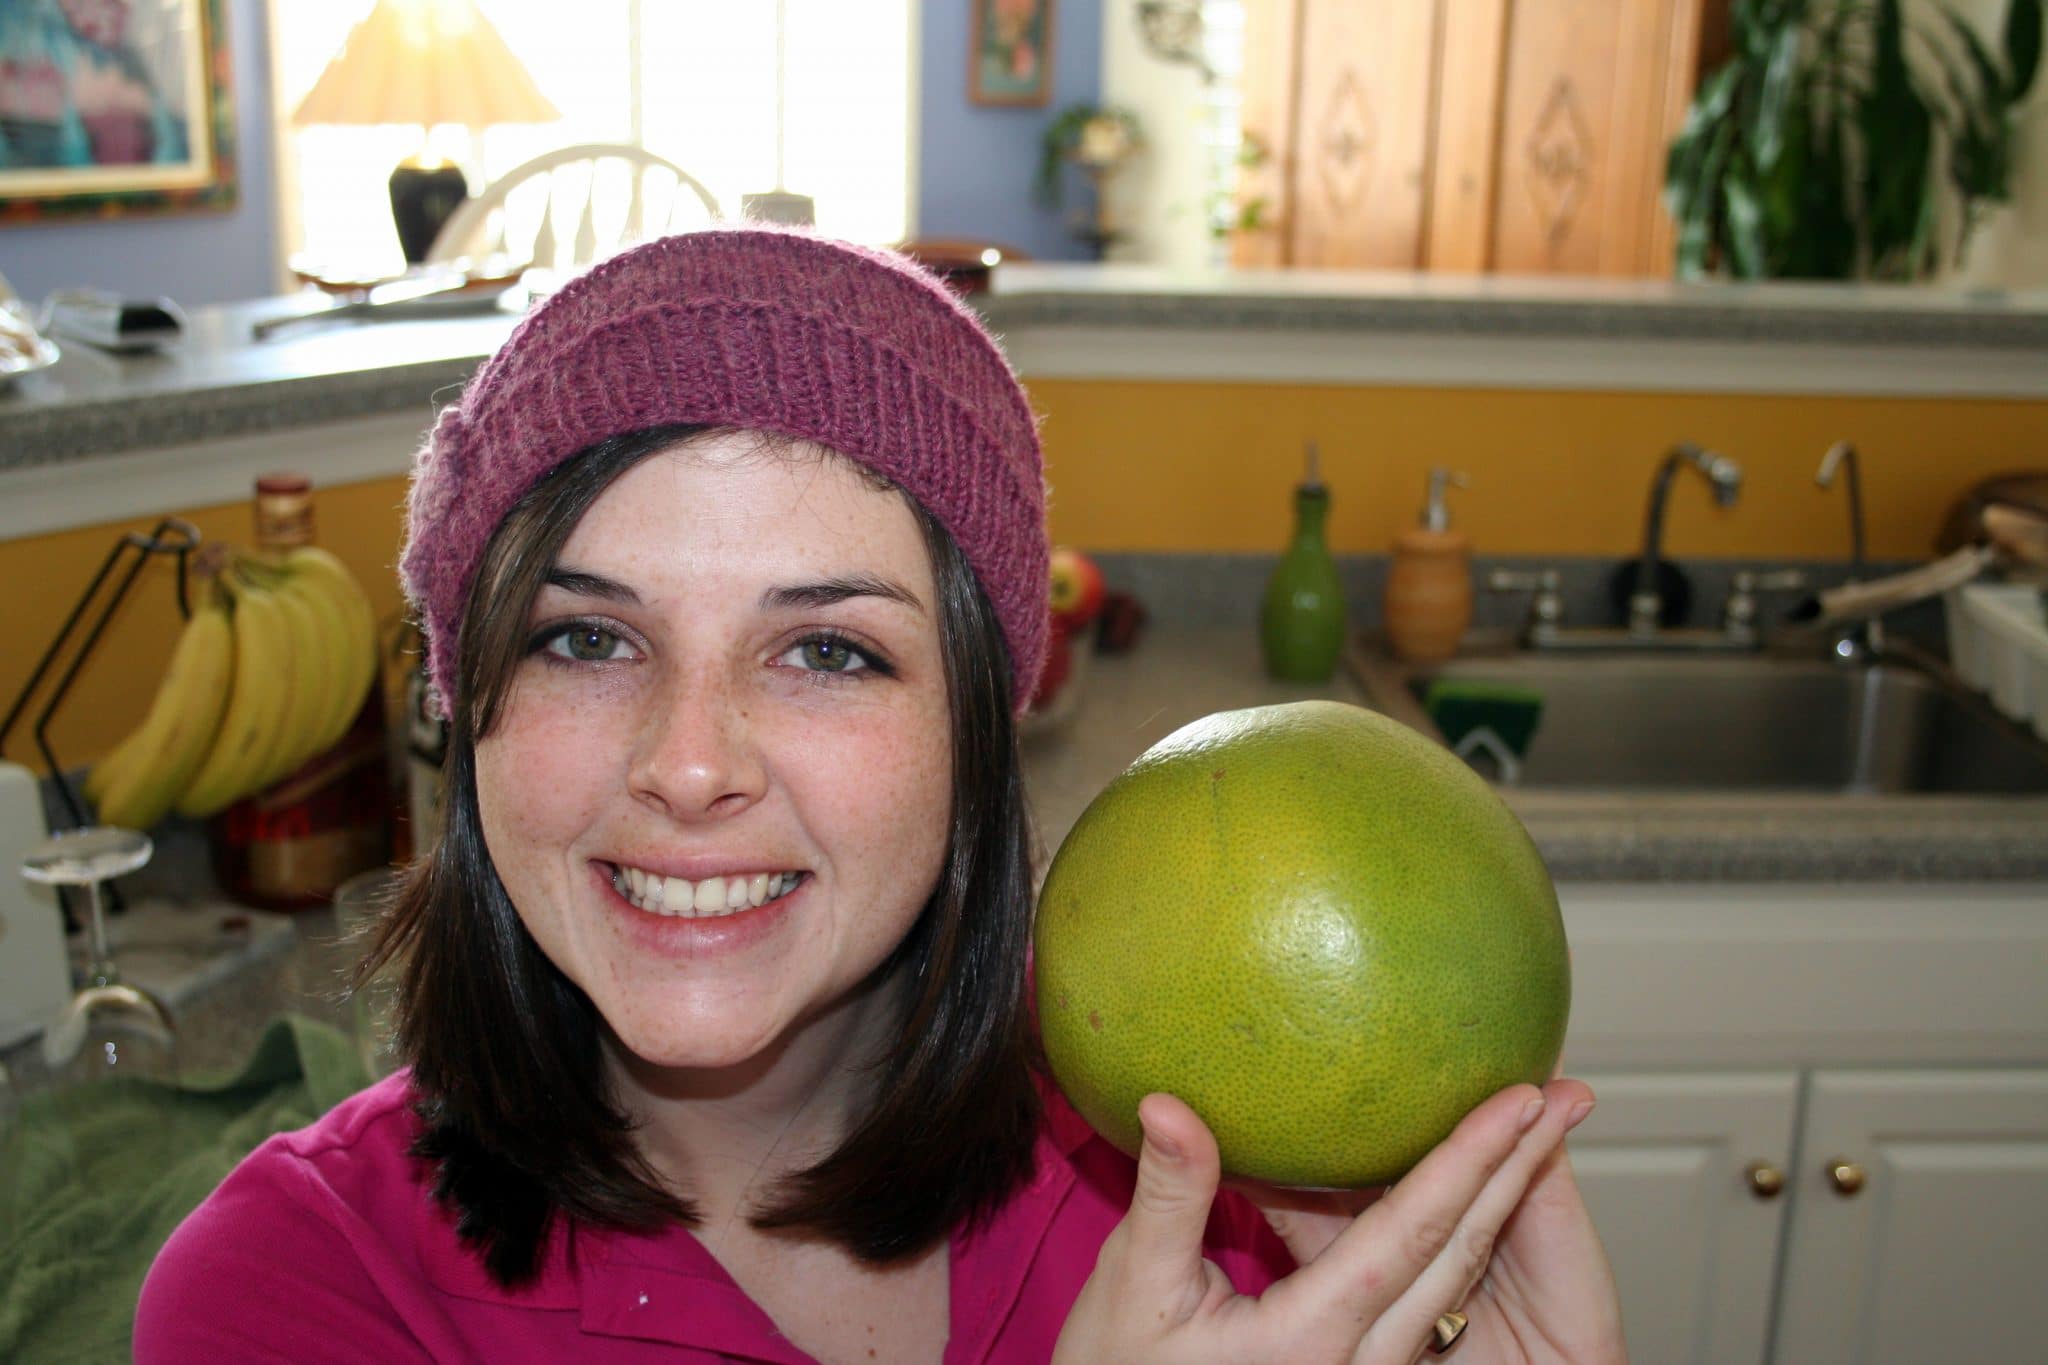 Picture pomelo next to women's head to see it is almost as large as women's head.